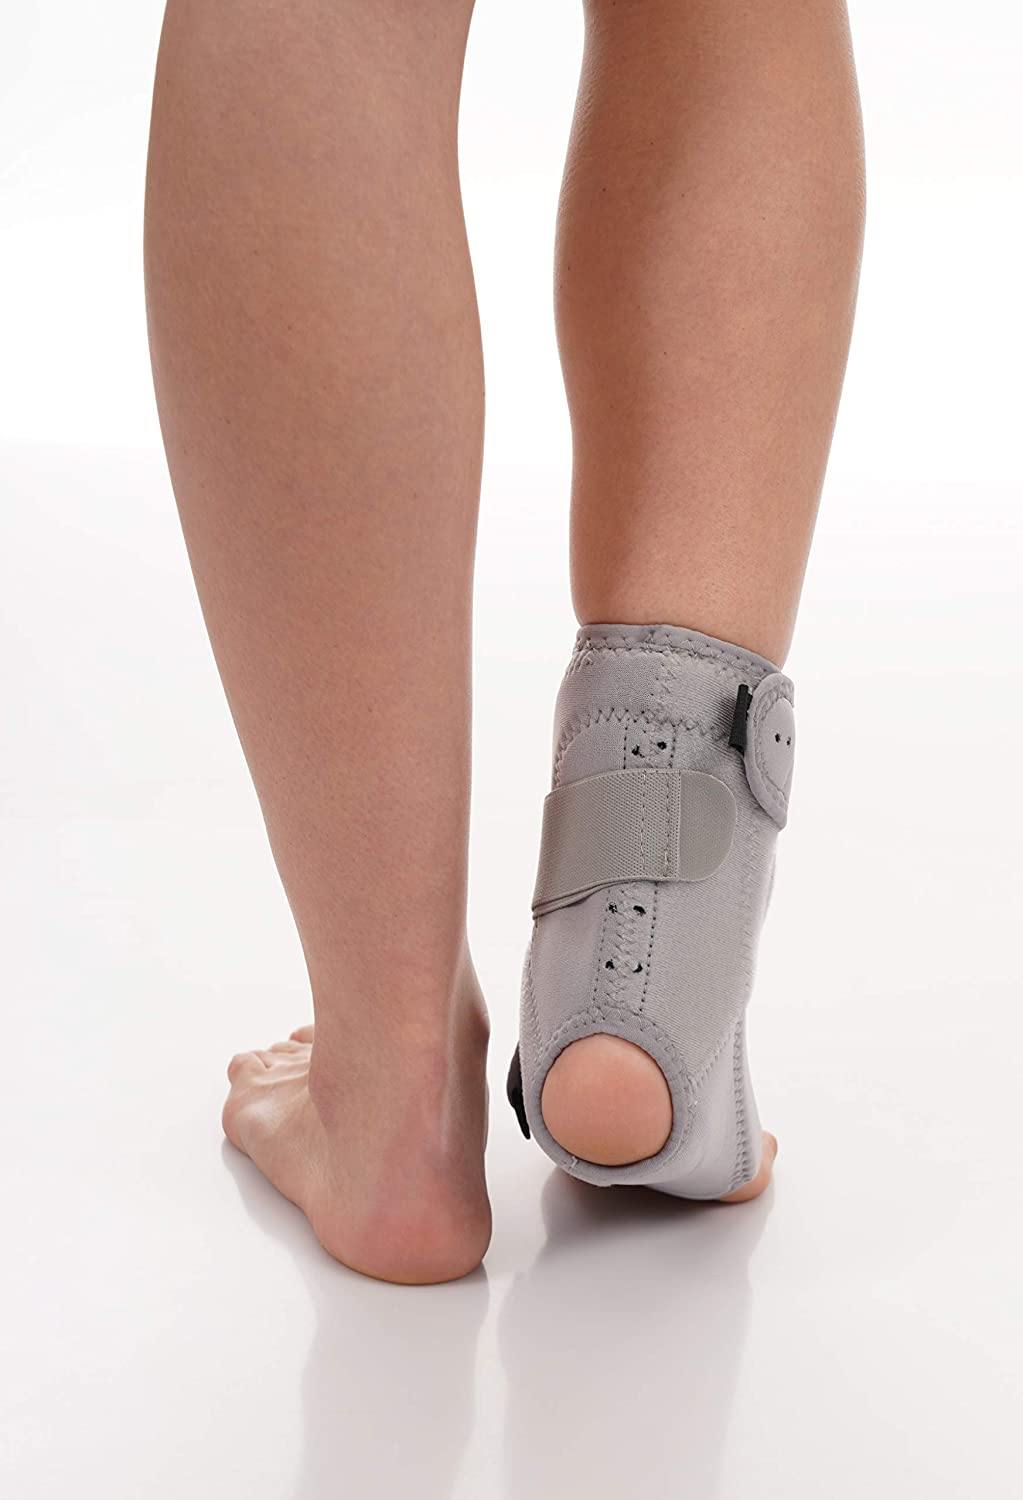 Tynor Ankle Support (Neo) Universal J-12-Health & Personal Care-dealsplant